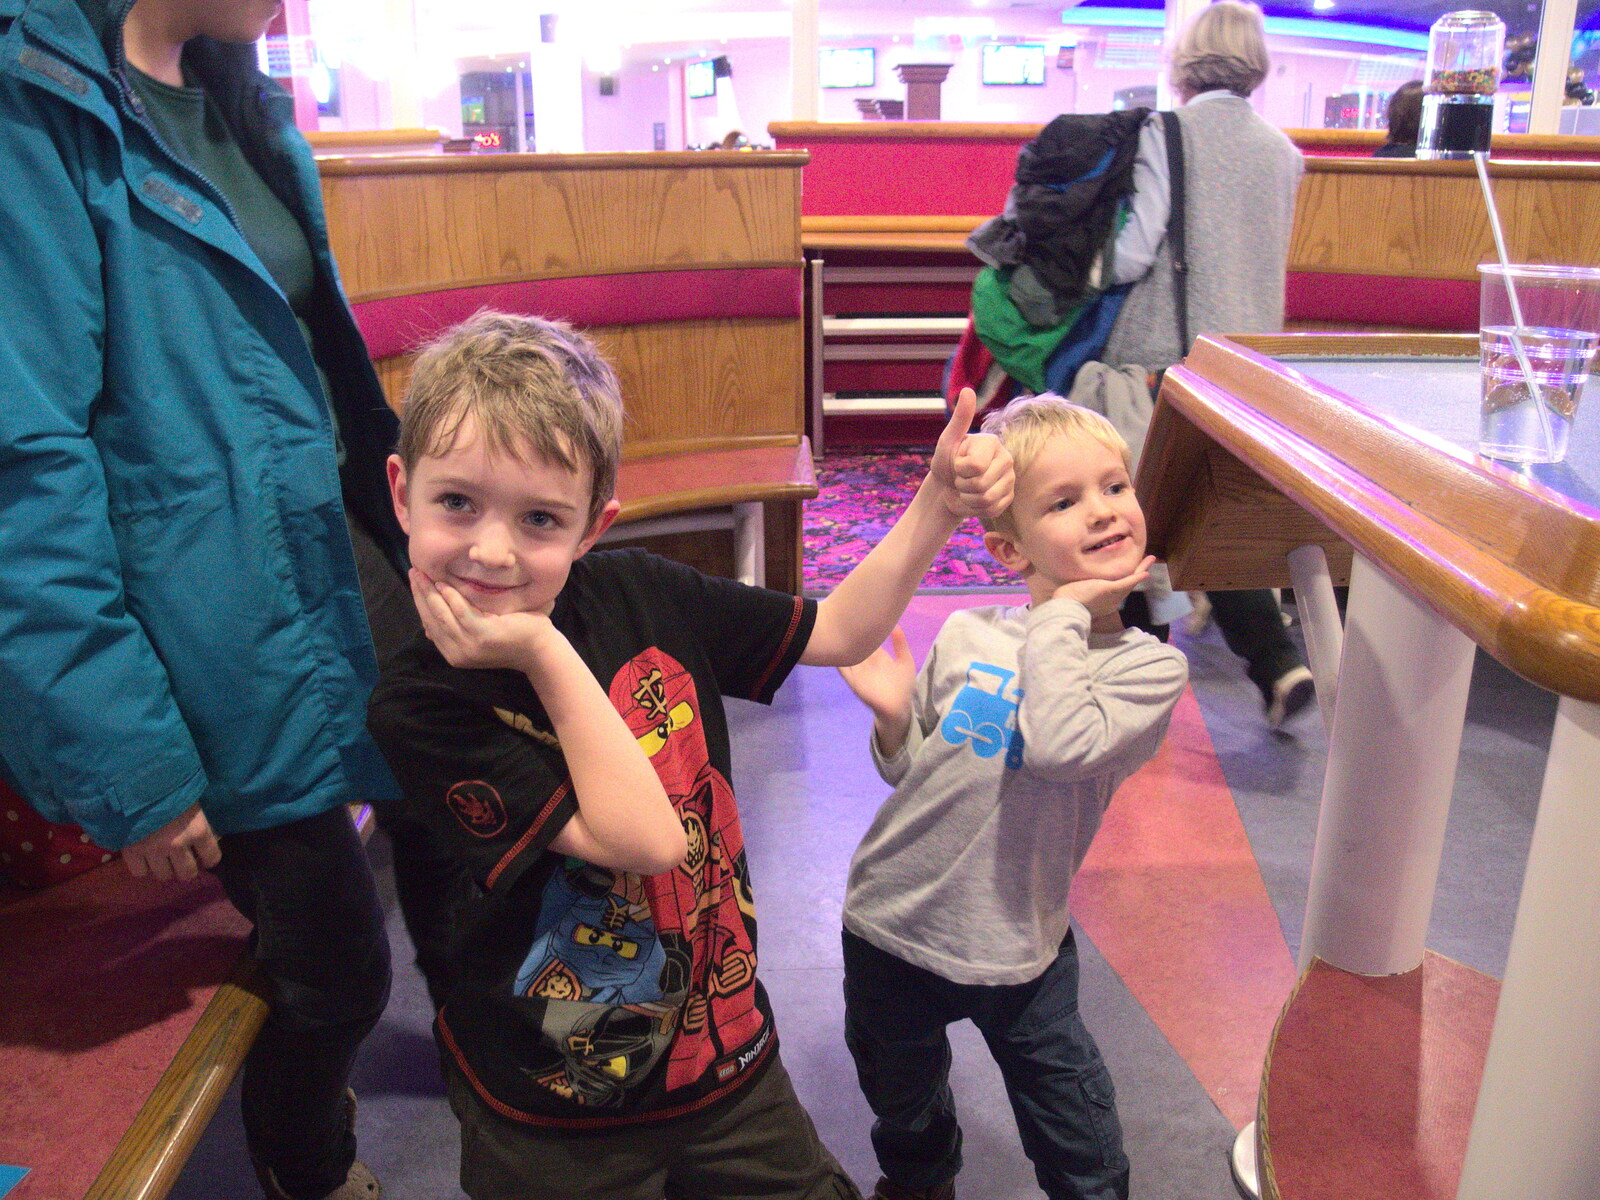 The boys do some sort of moves from Ten-Pin Bowling, Riverside, Norwich - 3rd January 2016